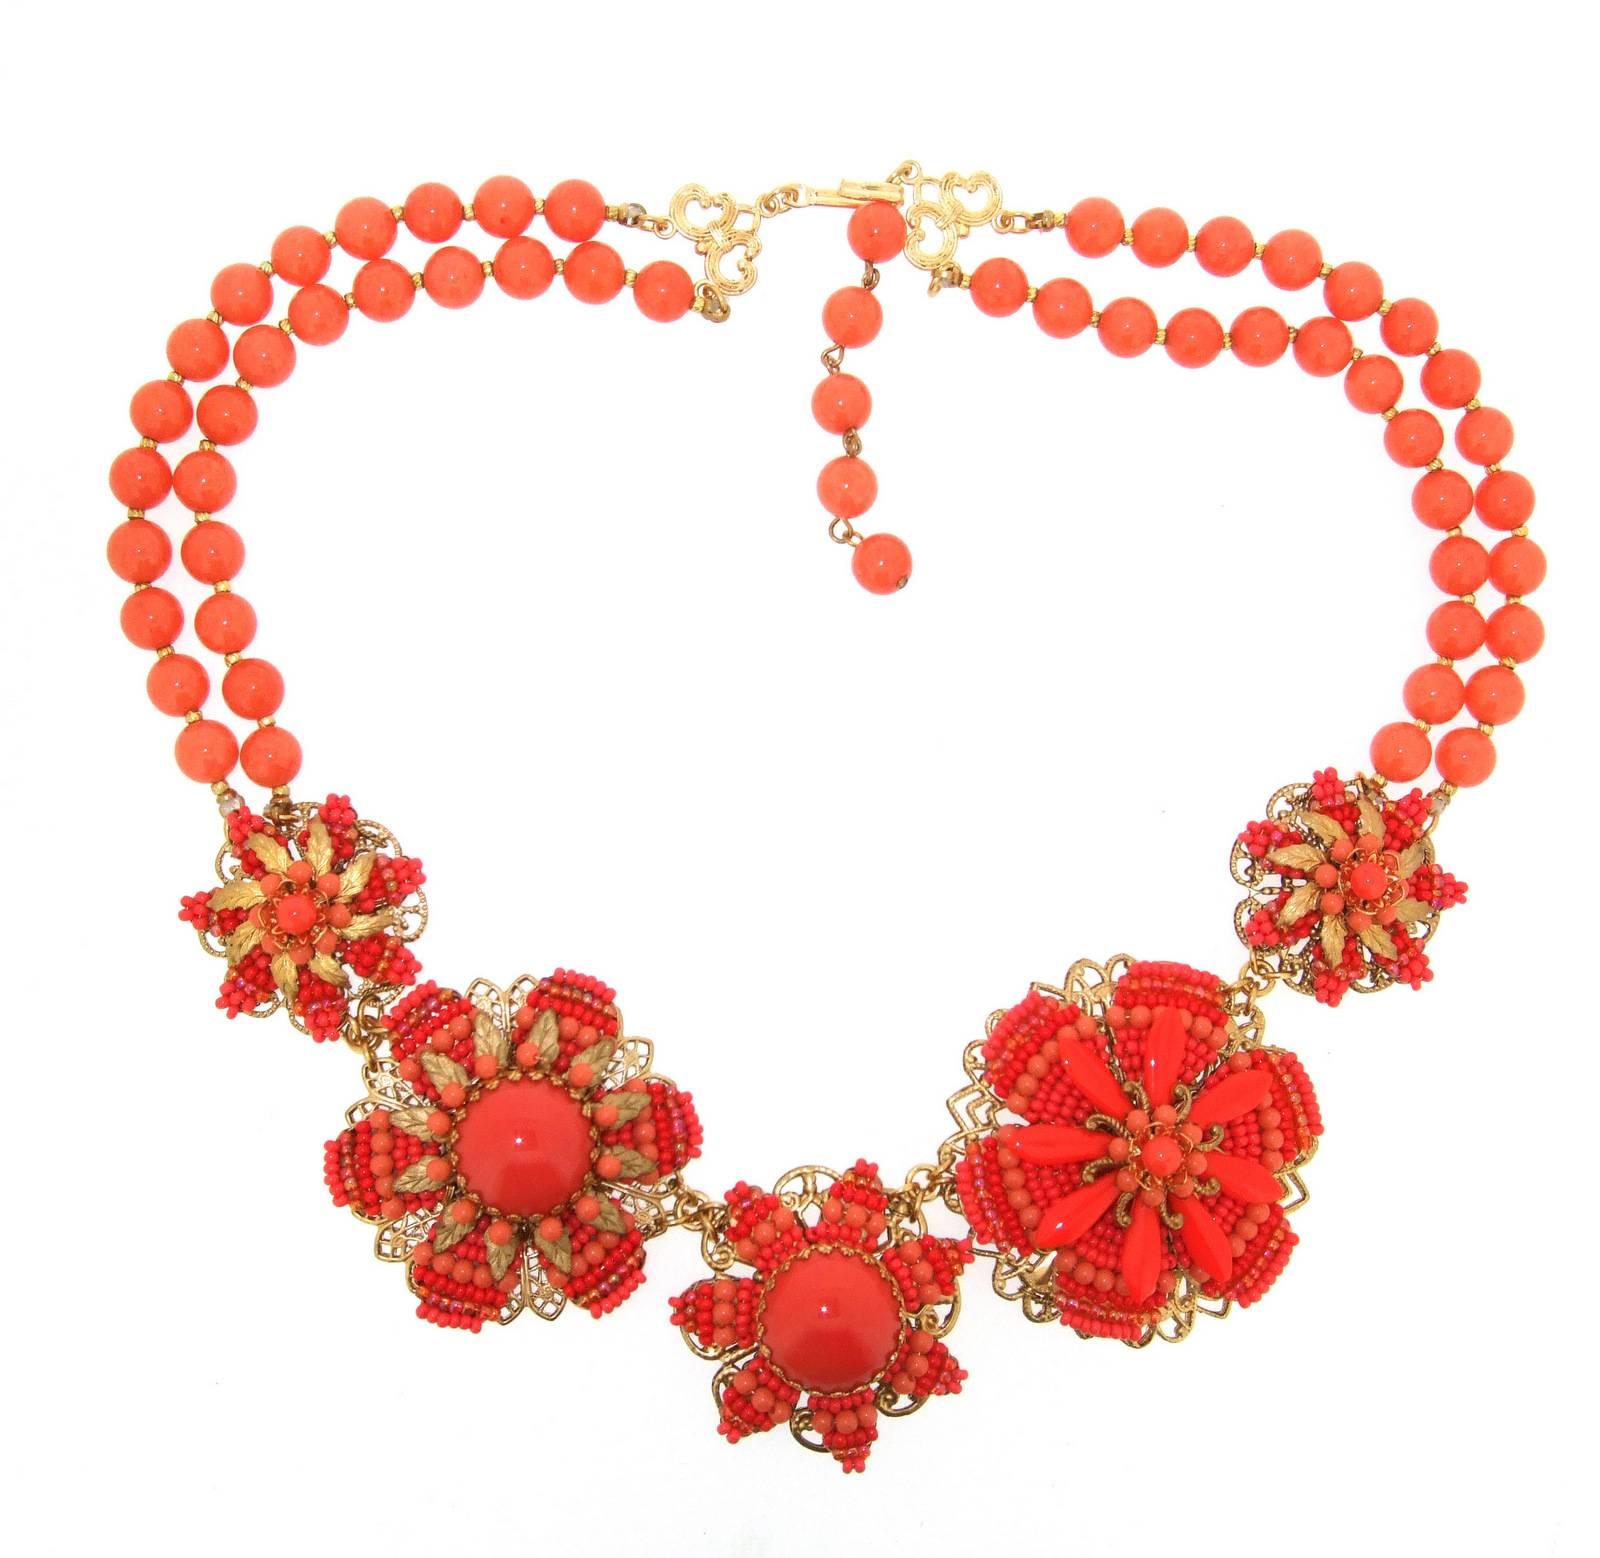 A beautiful vintage statement necklace by Stanley Hagler NYC with a floral intricate beadwork design in vintage coral glass. It can be worn between 20 and 22 inches in length with the adjustable chain and catch. The biggest section is 5cm